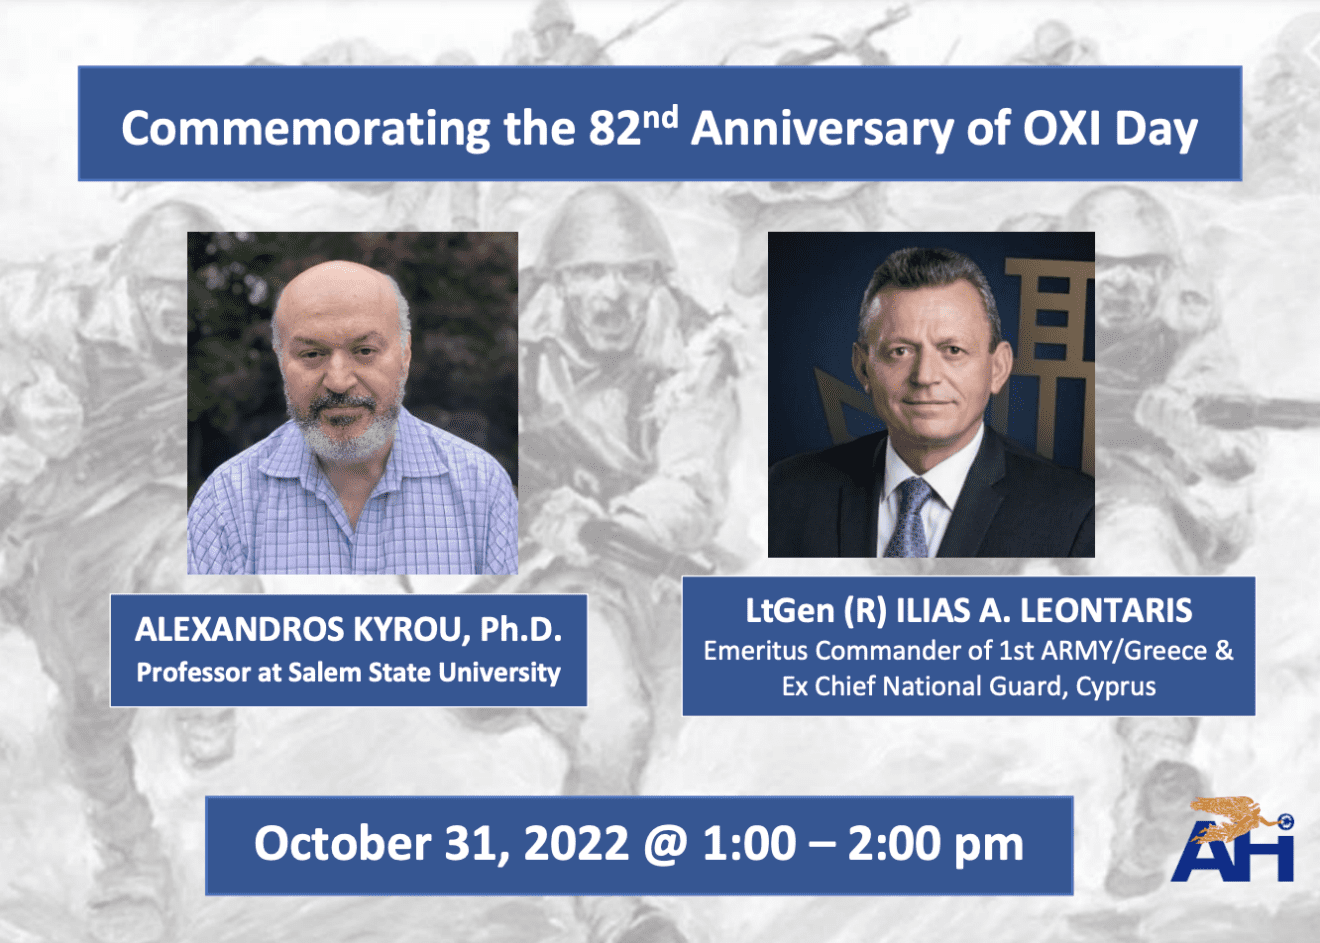 Commemorating the 82nd Anniversary of OXI Day